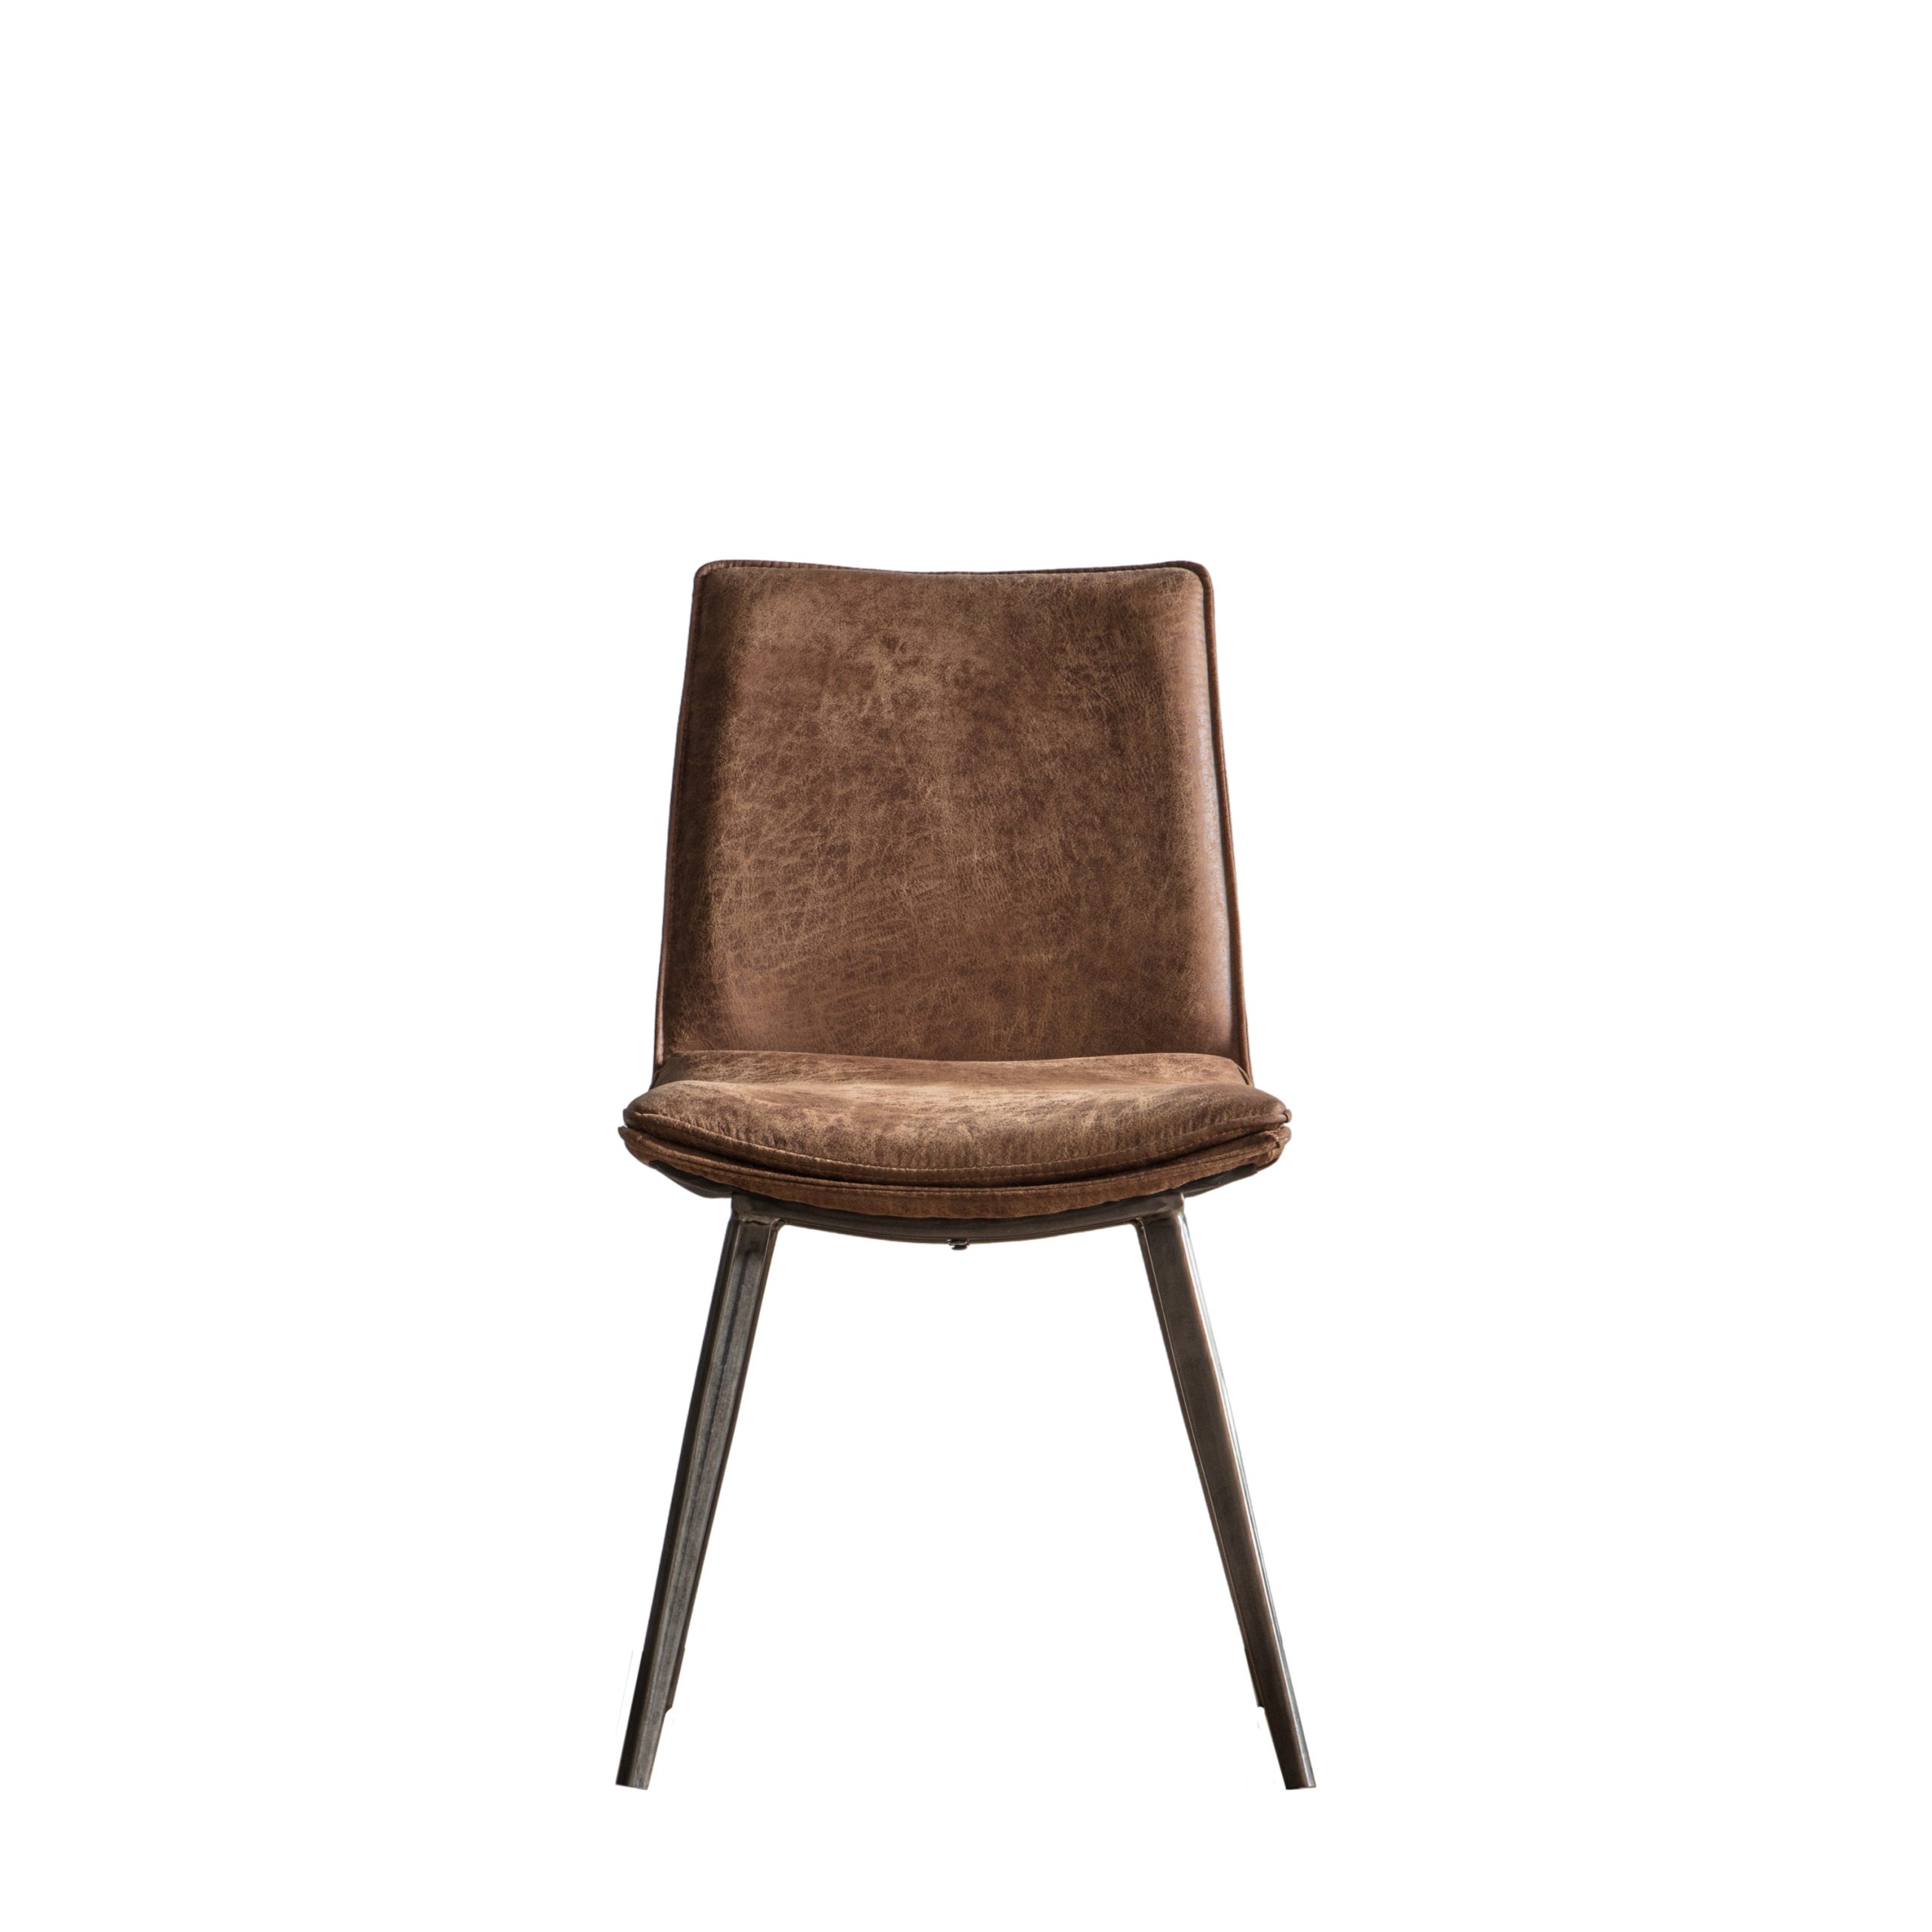 Gallery Direct Hinks Chair Brown (Set of 2)